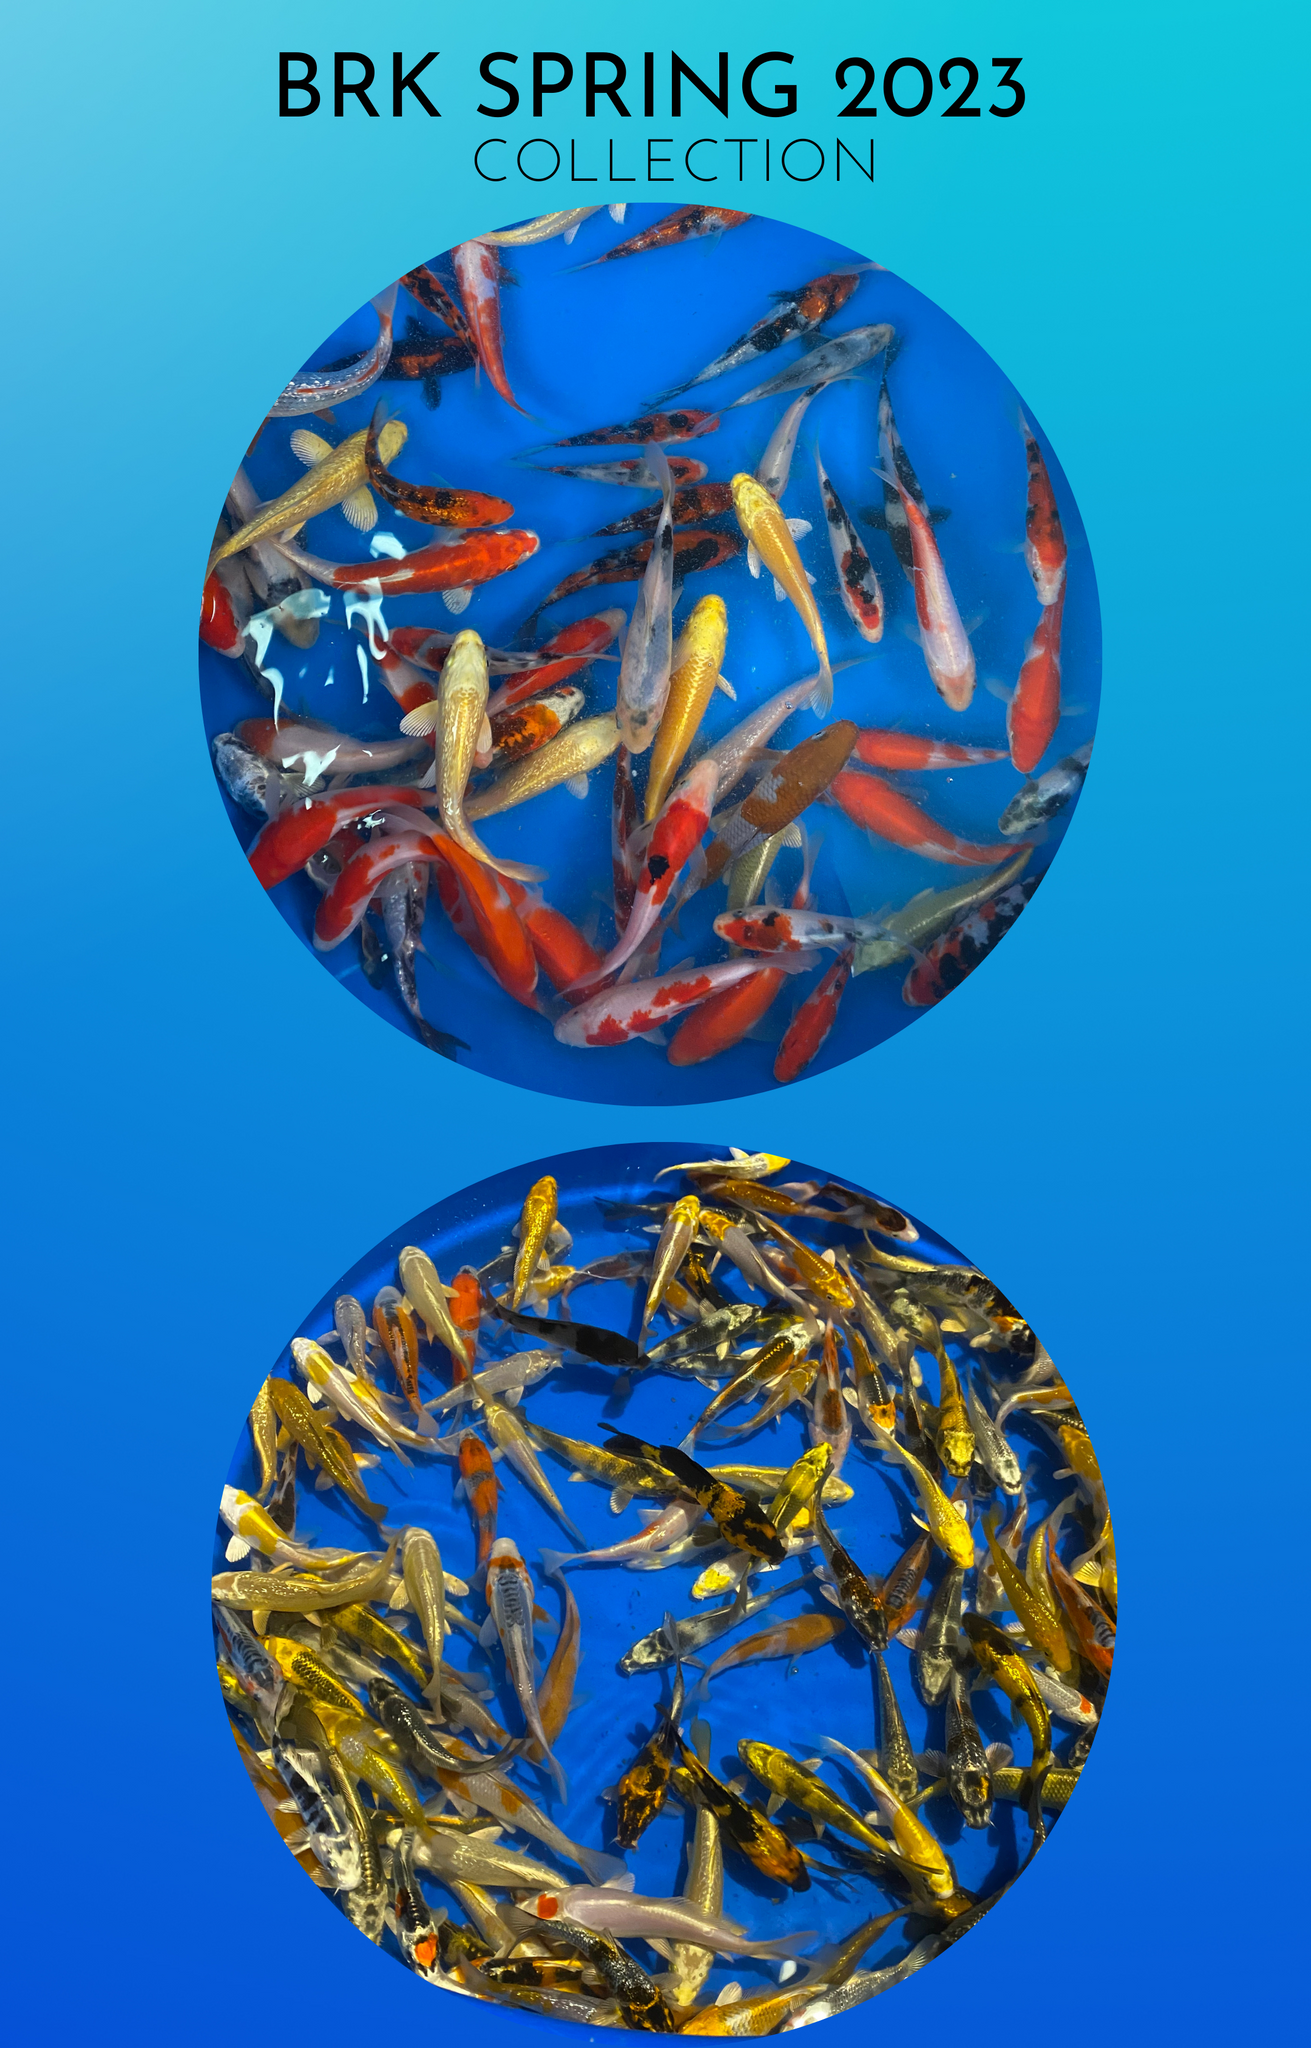 bLUE RIBBON KOI IMAGE OF SPRING 2023 COLLECTION , HUINDREDS OF KOI IN VIEWING BOWLS